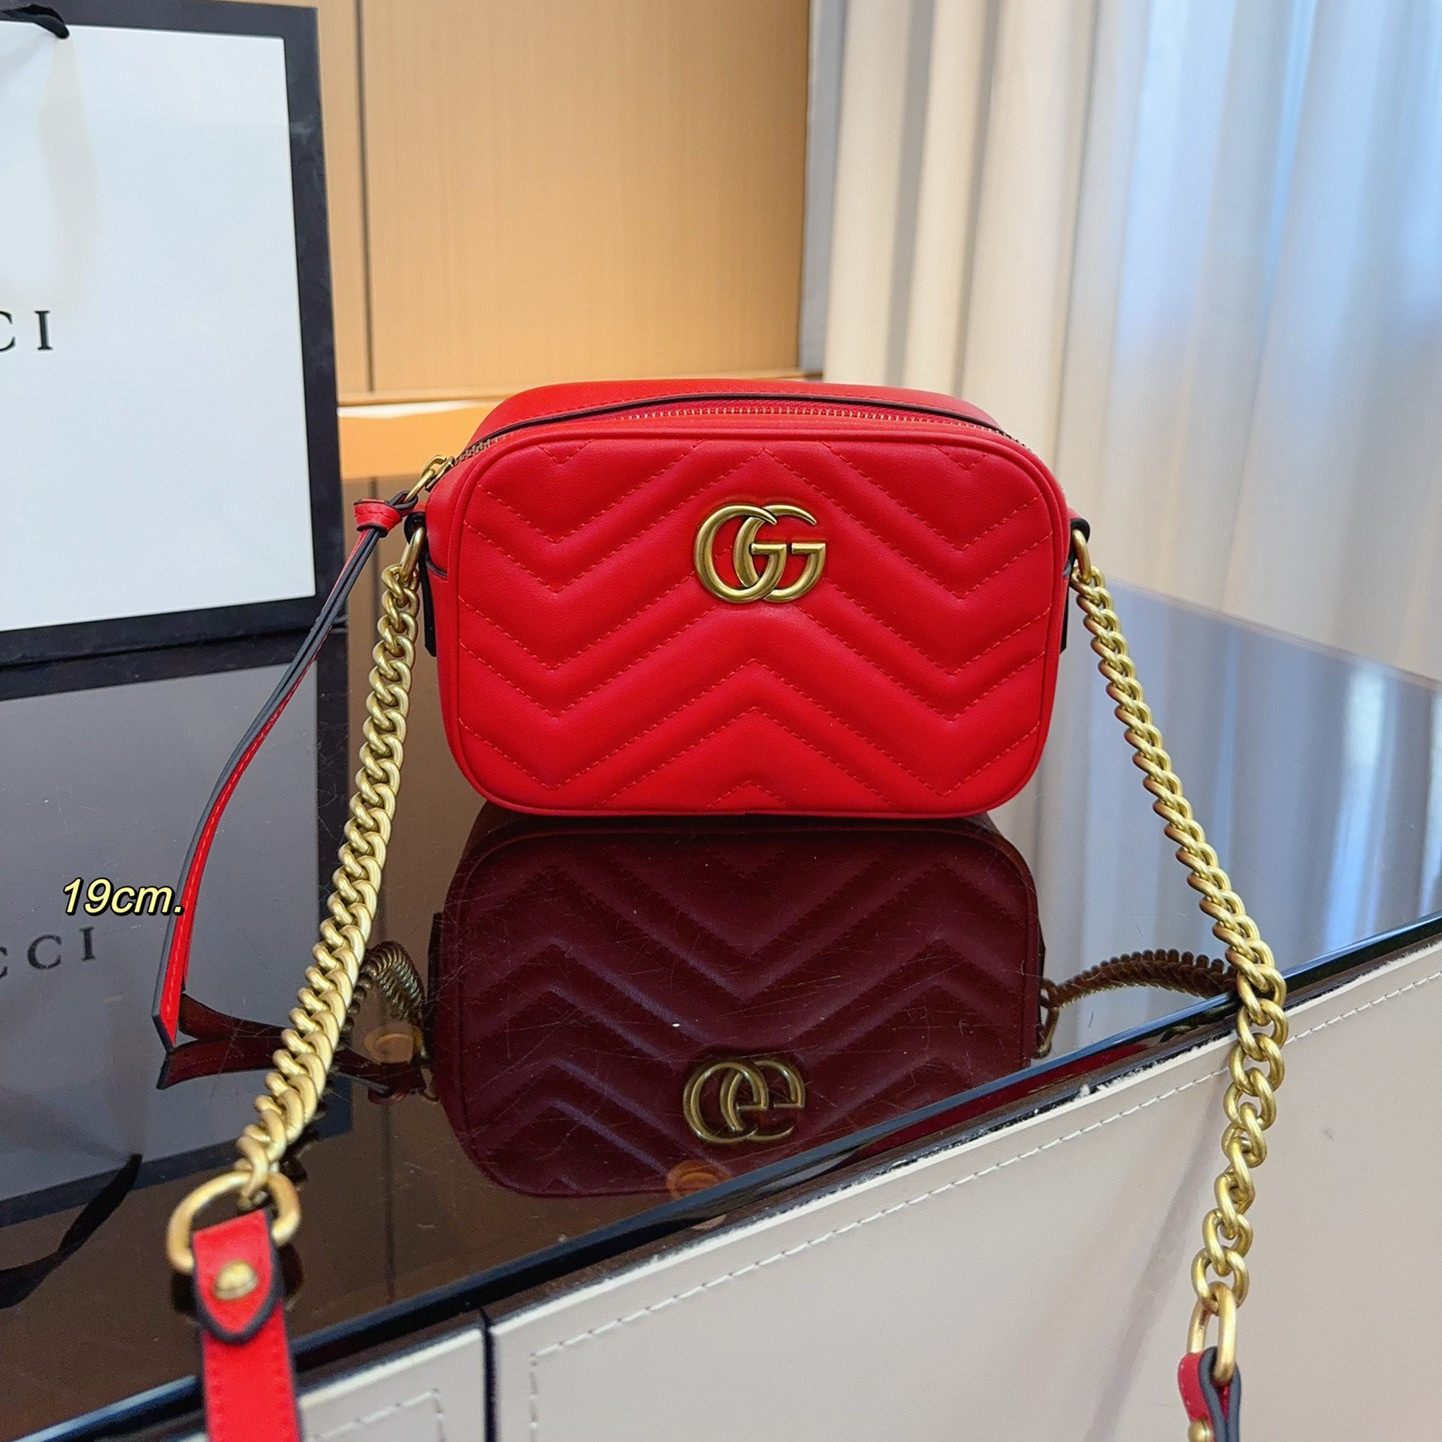 GG new arrival red bag